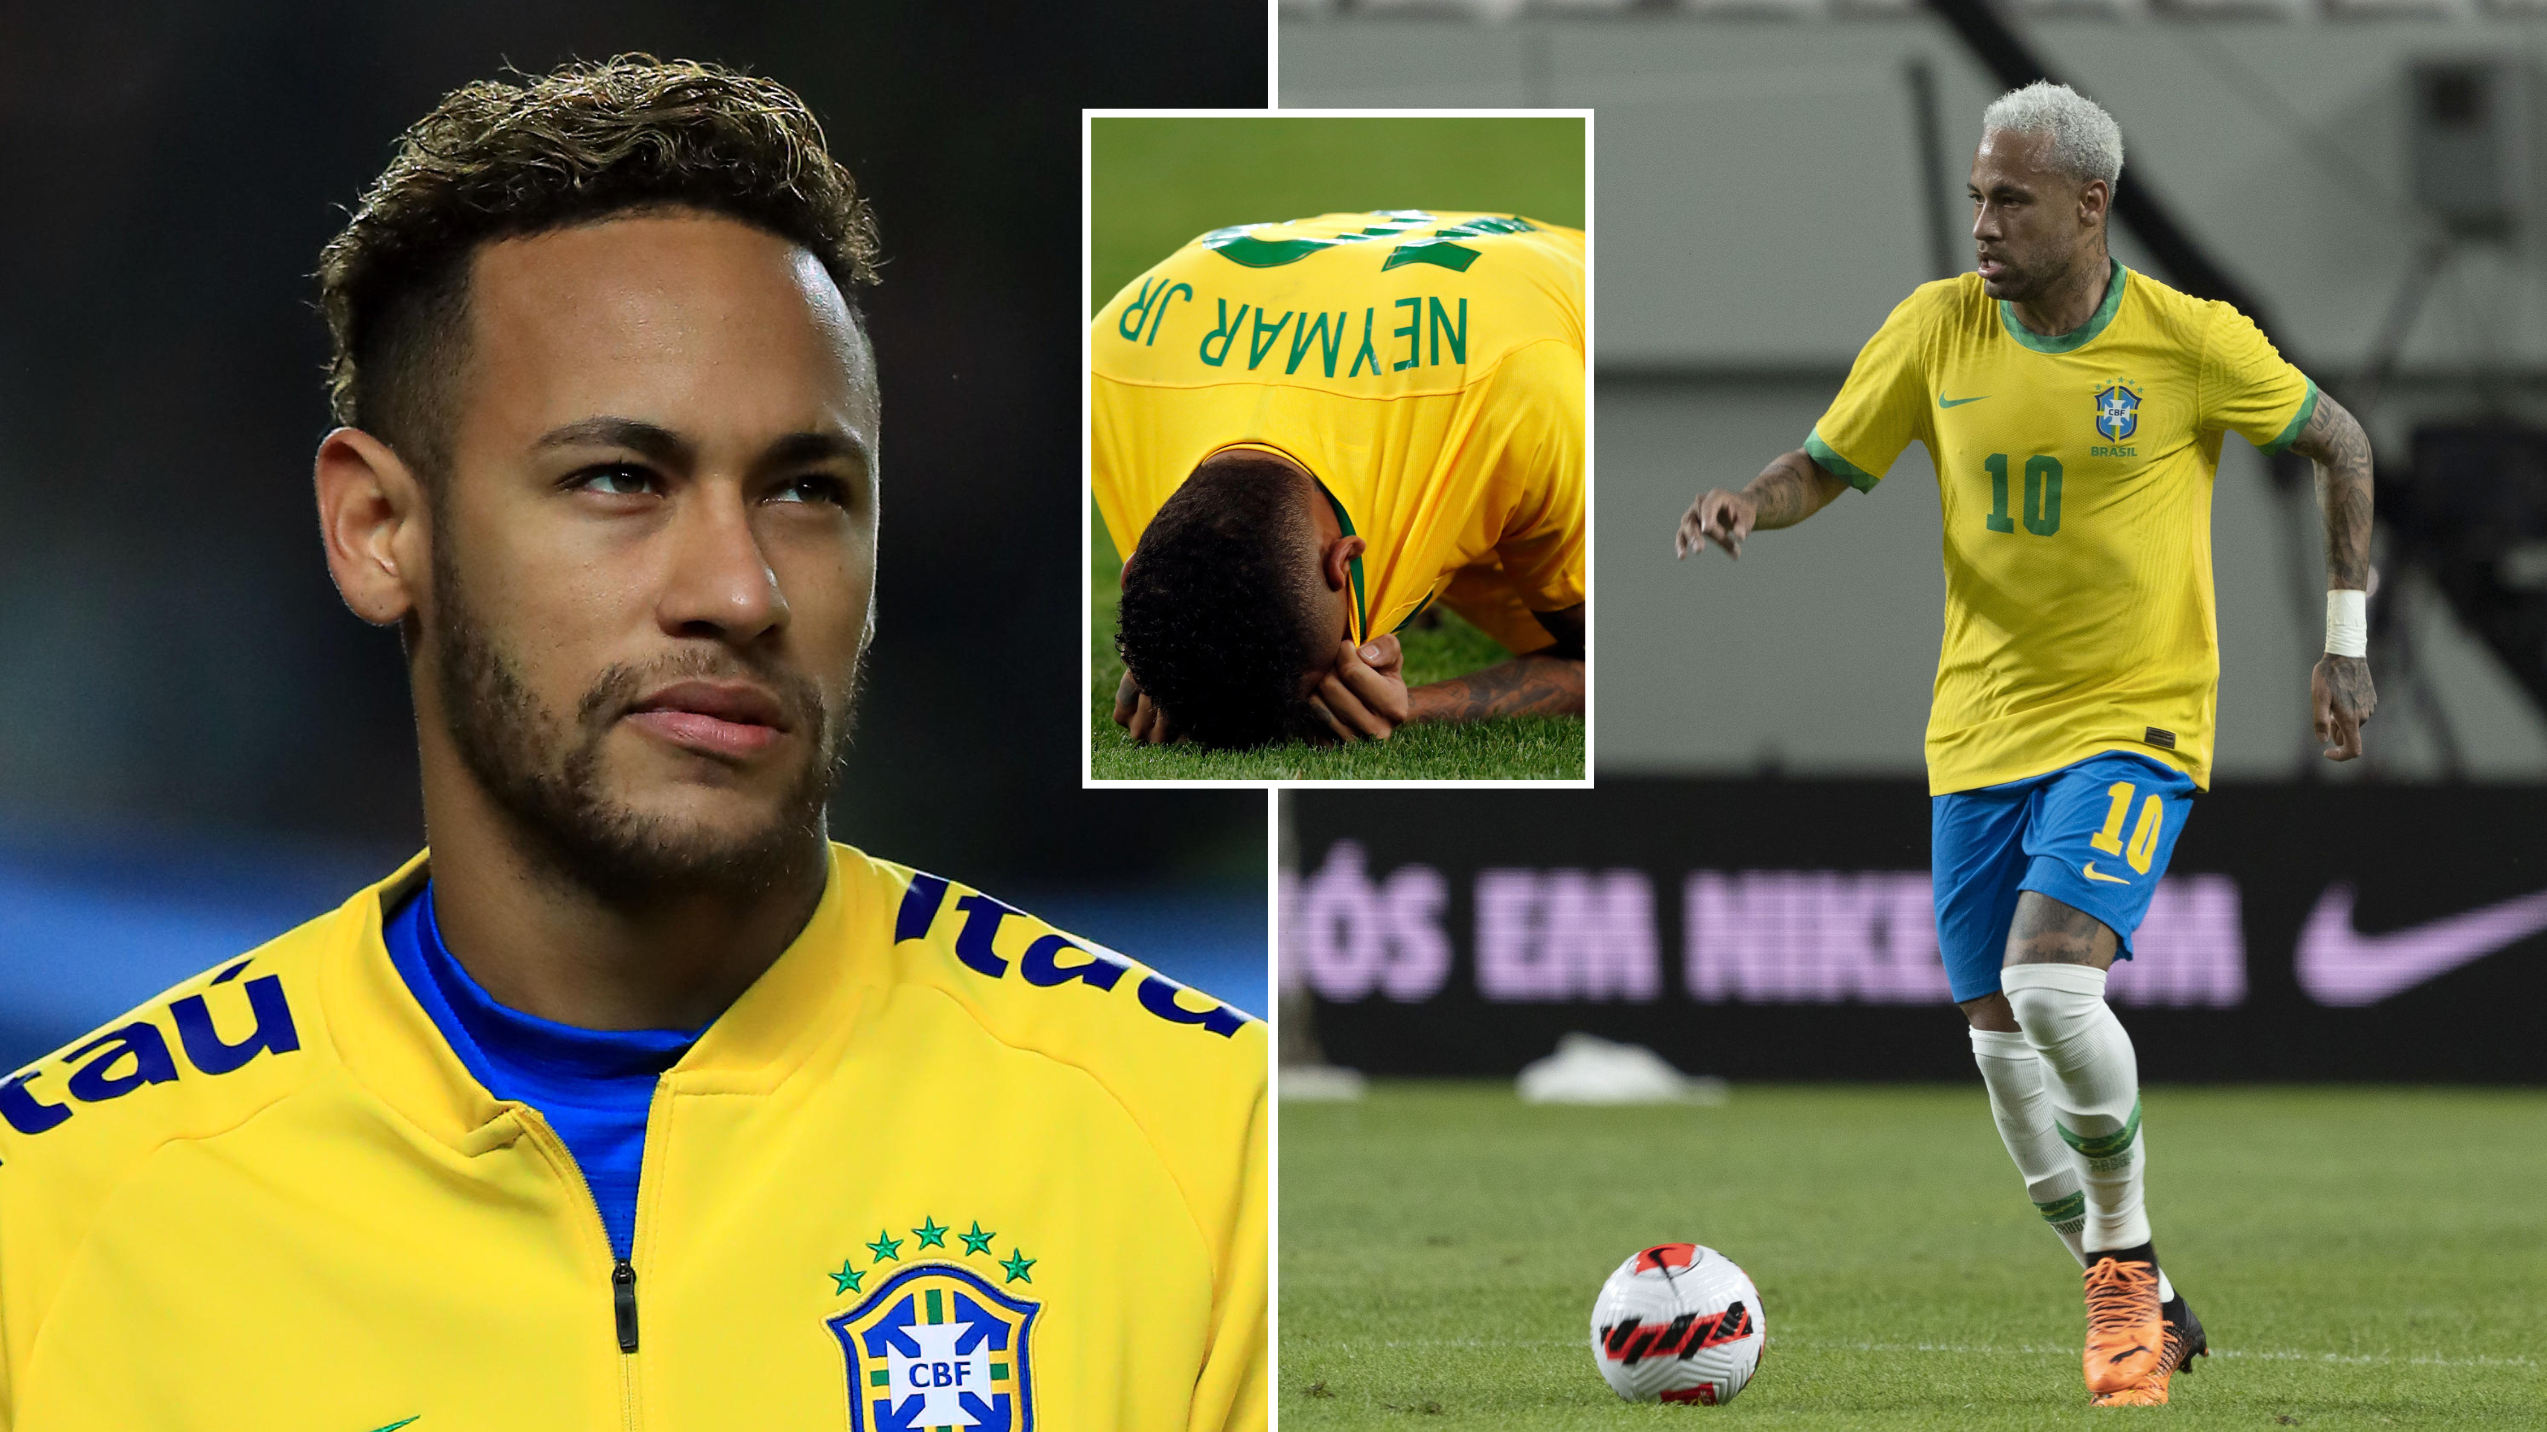 Neymar Told He Is Not Considered A Brazil 'Legend' And Is Only A